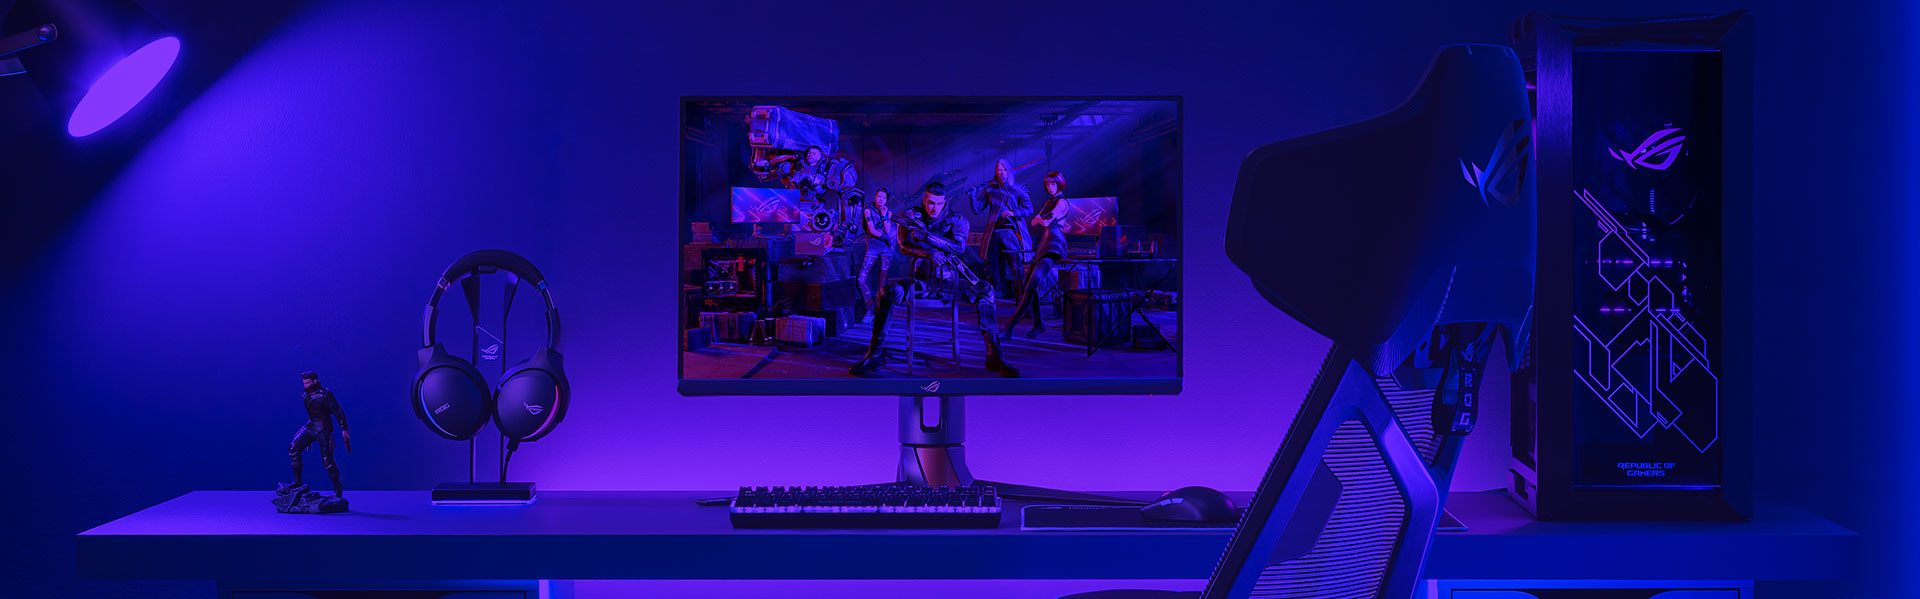 ROG gaming setup with a PC,  monitor, a keyboard and mouse set, and a headset